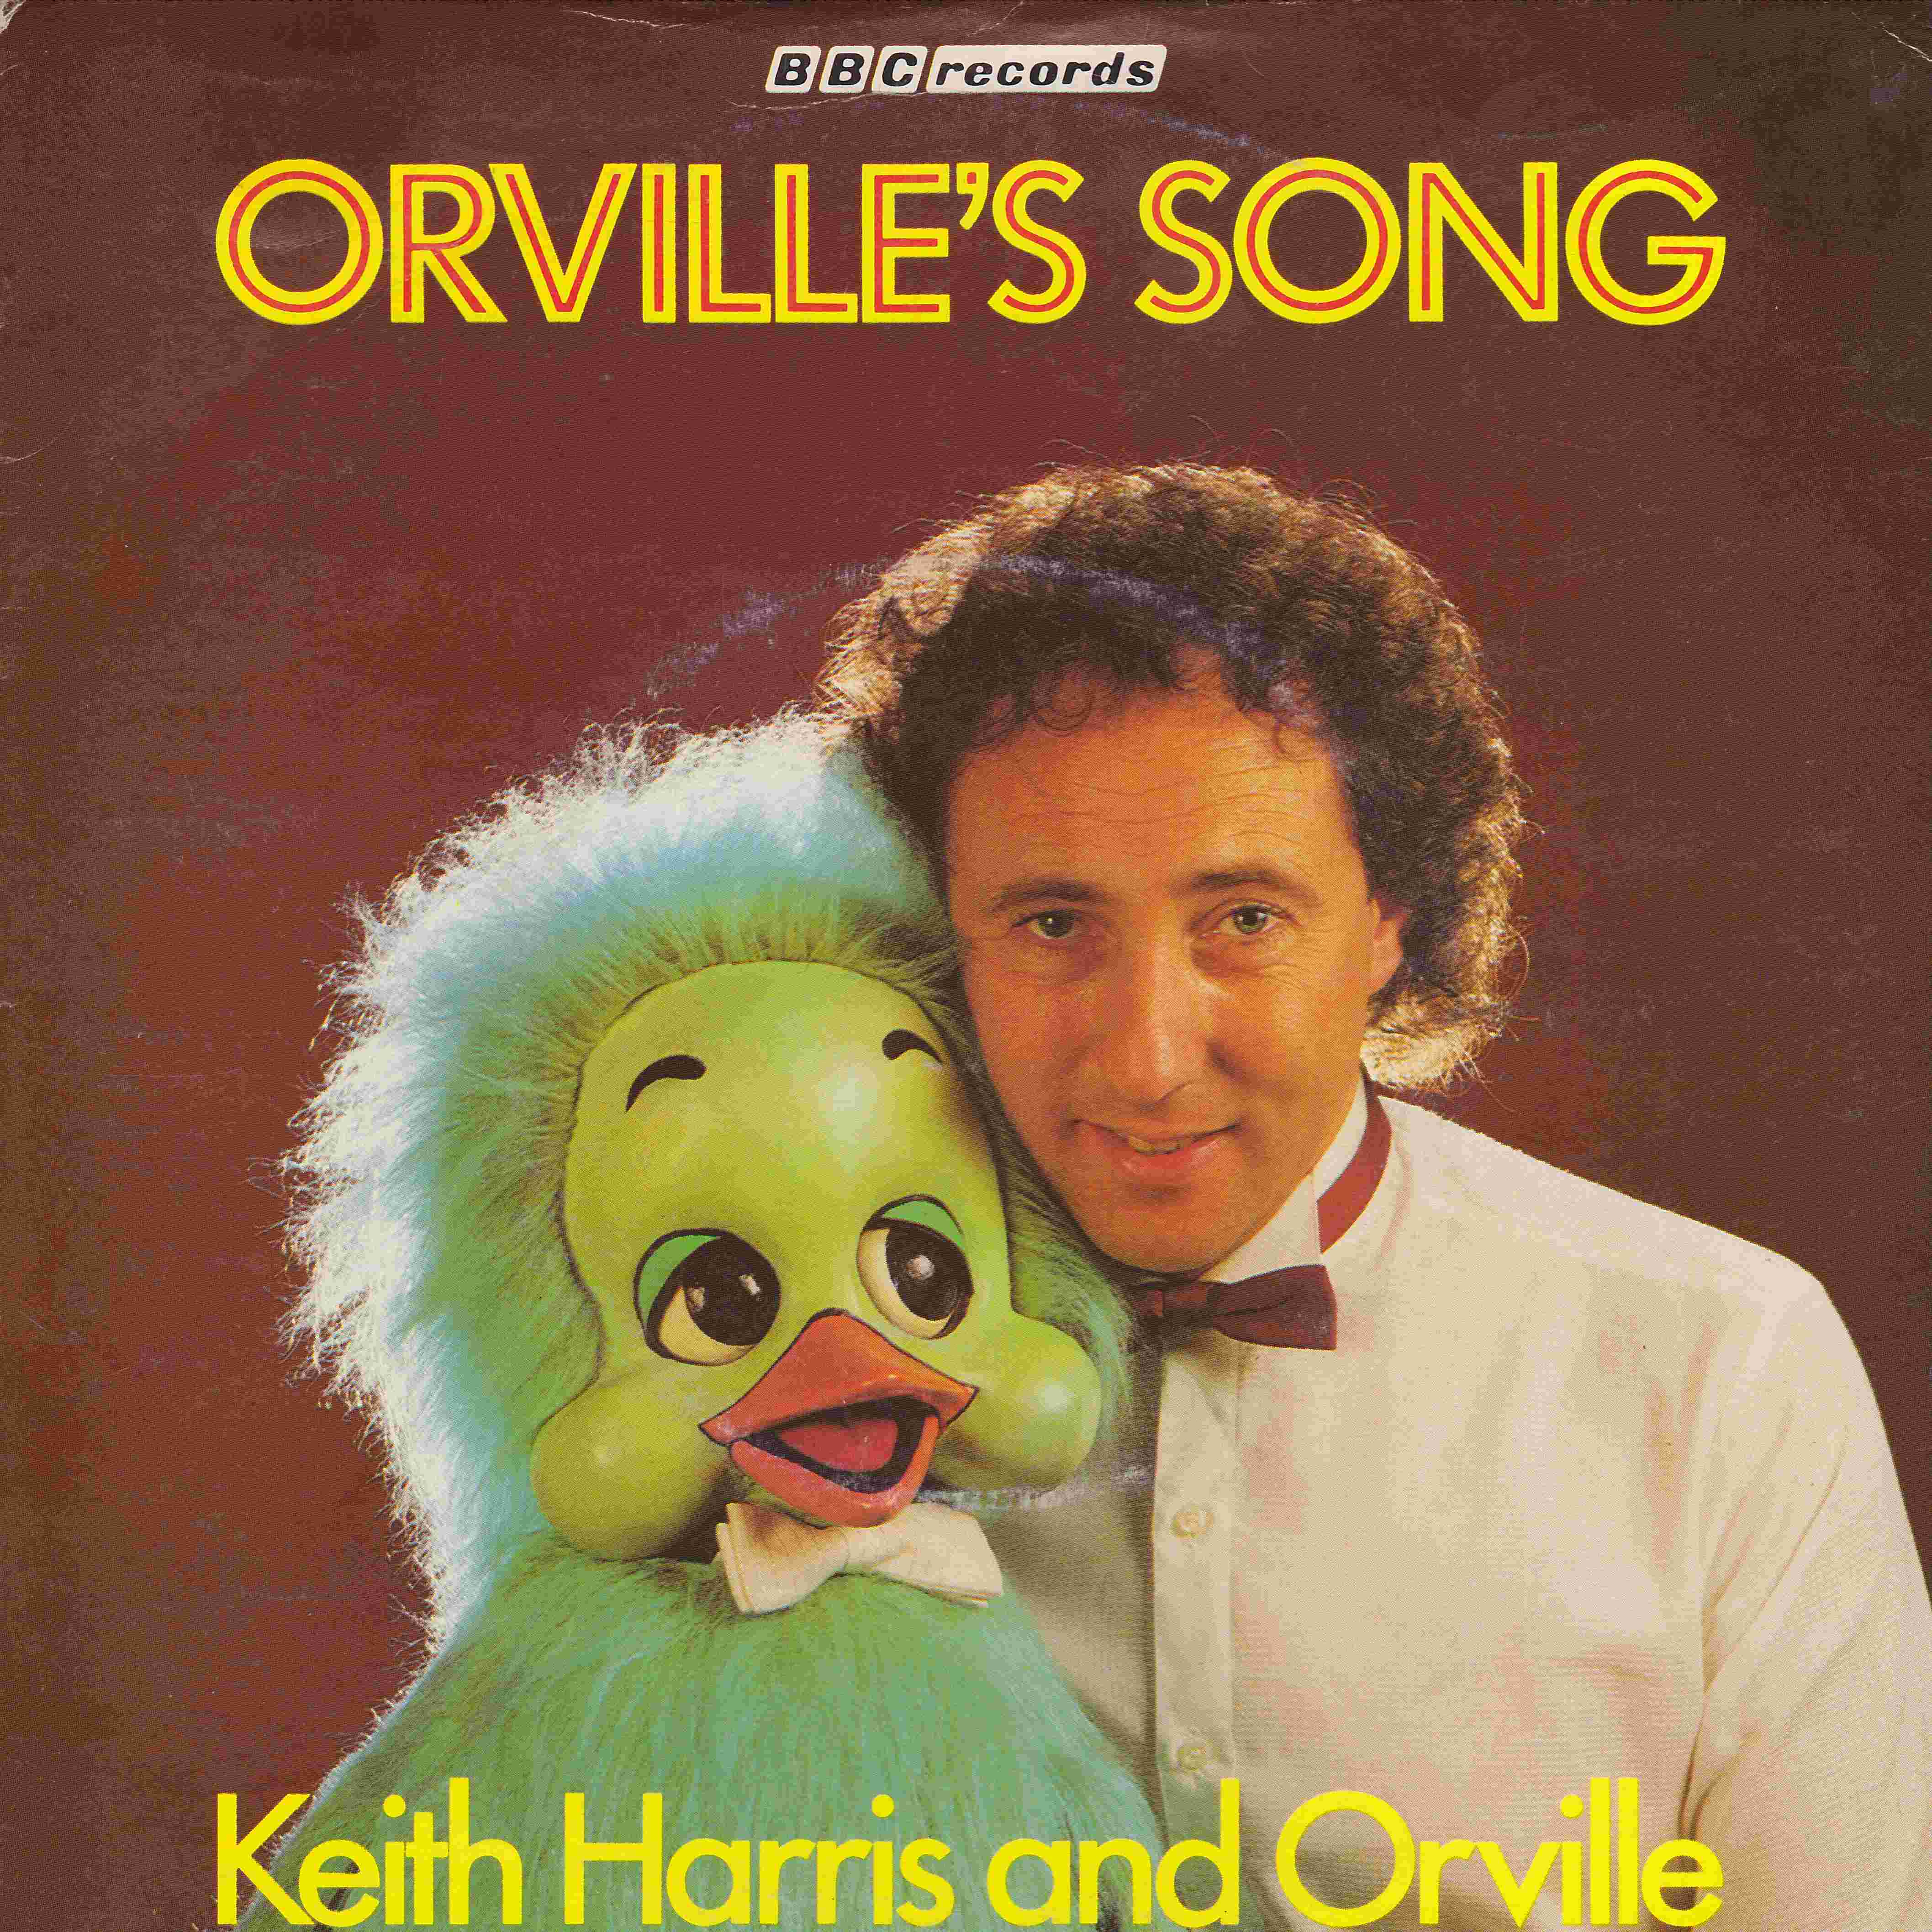 Picture of RESL 124 Orville's song by artist Keith Harris and Orville from the BBC records and Tapes library